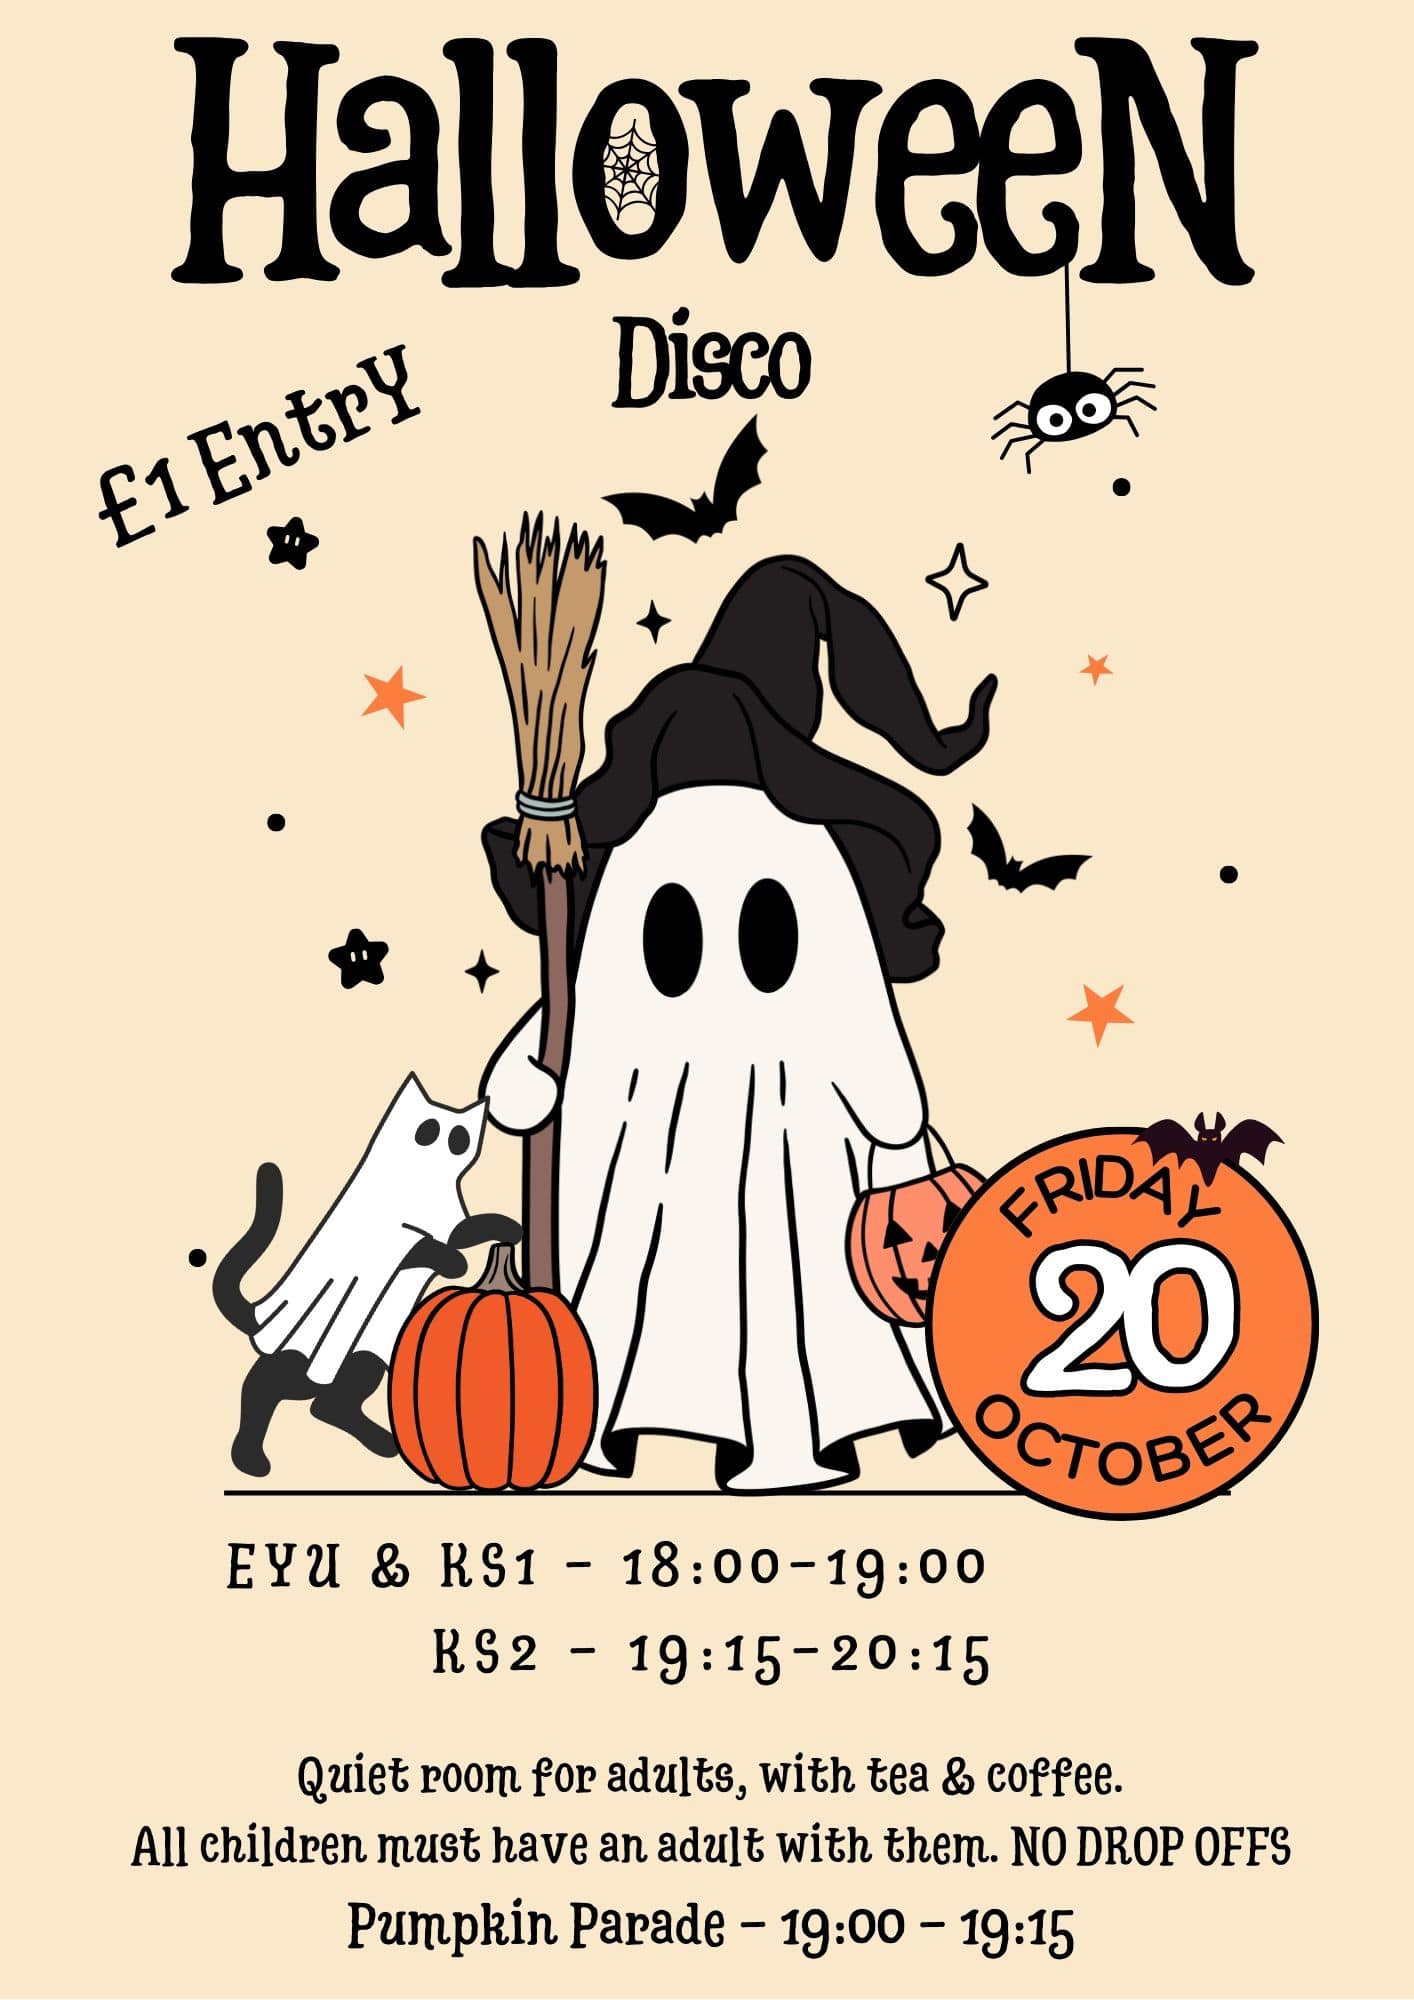 Halloween Disco, £1 entry. Friday 20th October. EYU&KS1 18:00-19:00. KS" 19:15-20:15. Quiet room for adults with tea and coffee. All children must have an adult with them. NO DROP OFFS. Pumpkin parade 19:00-19:15.